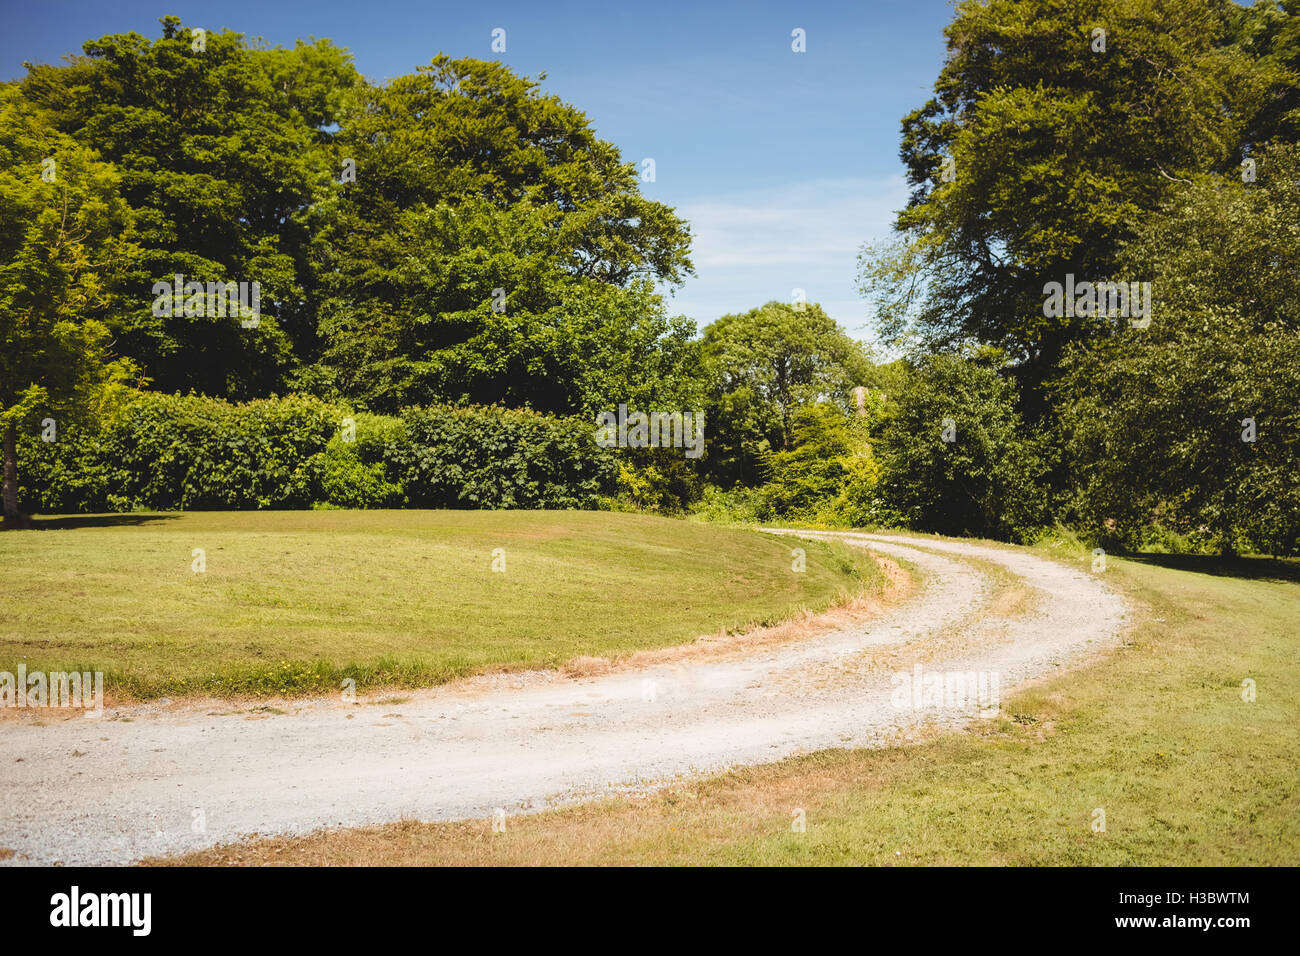 View of dirt track in countryside Stock Photo